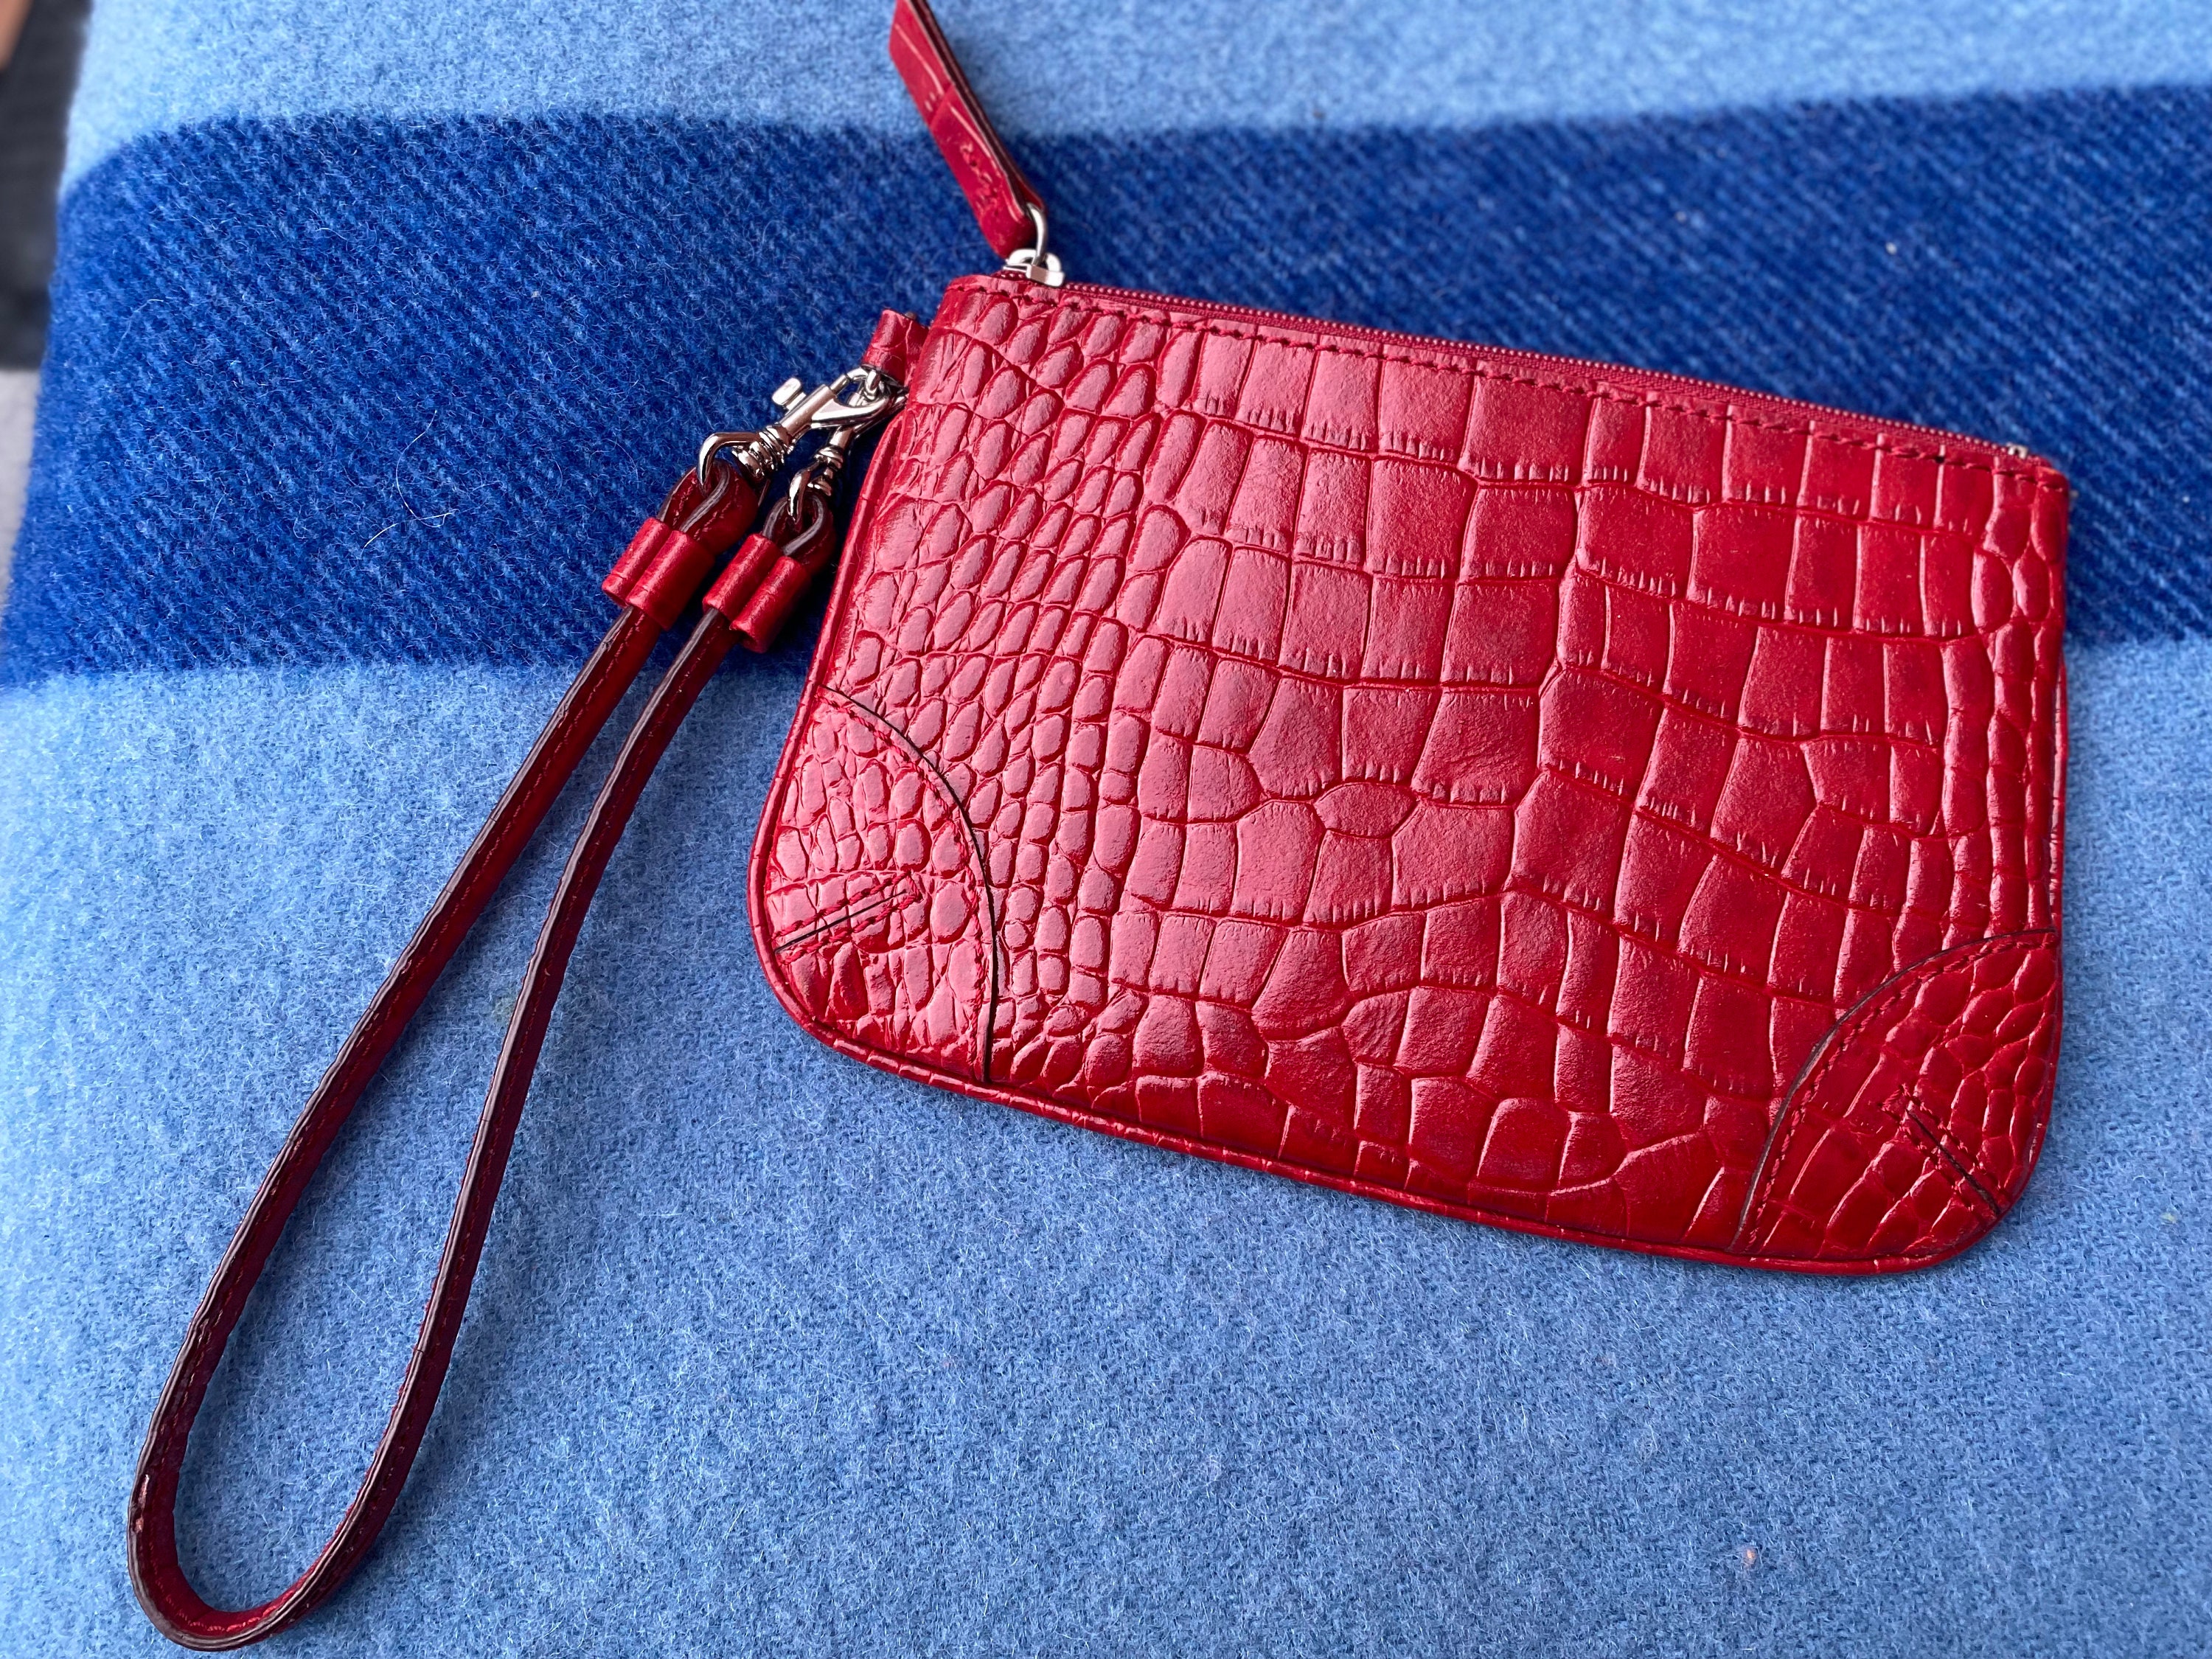 Franklin Covey Red Purse Tote Bag